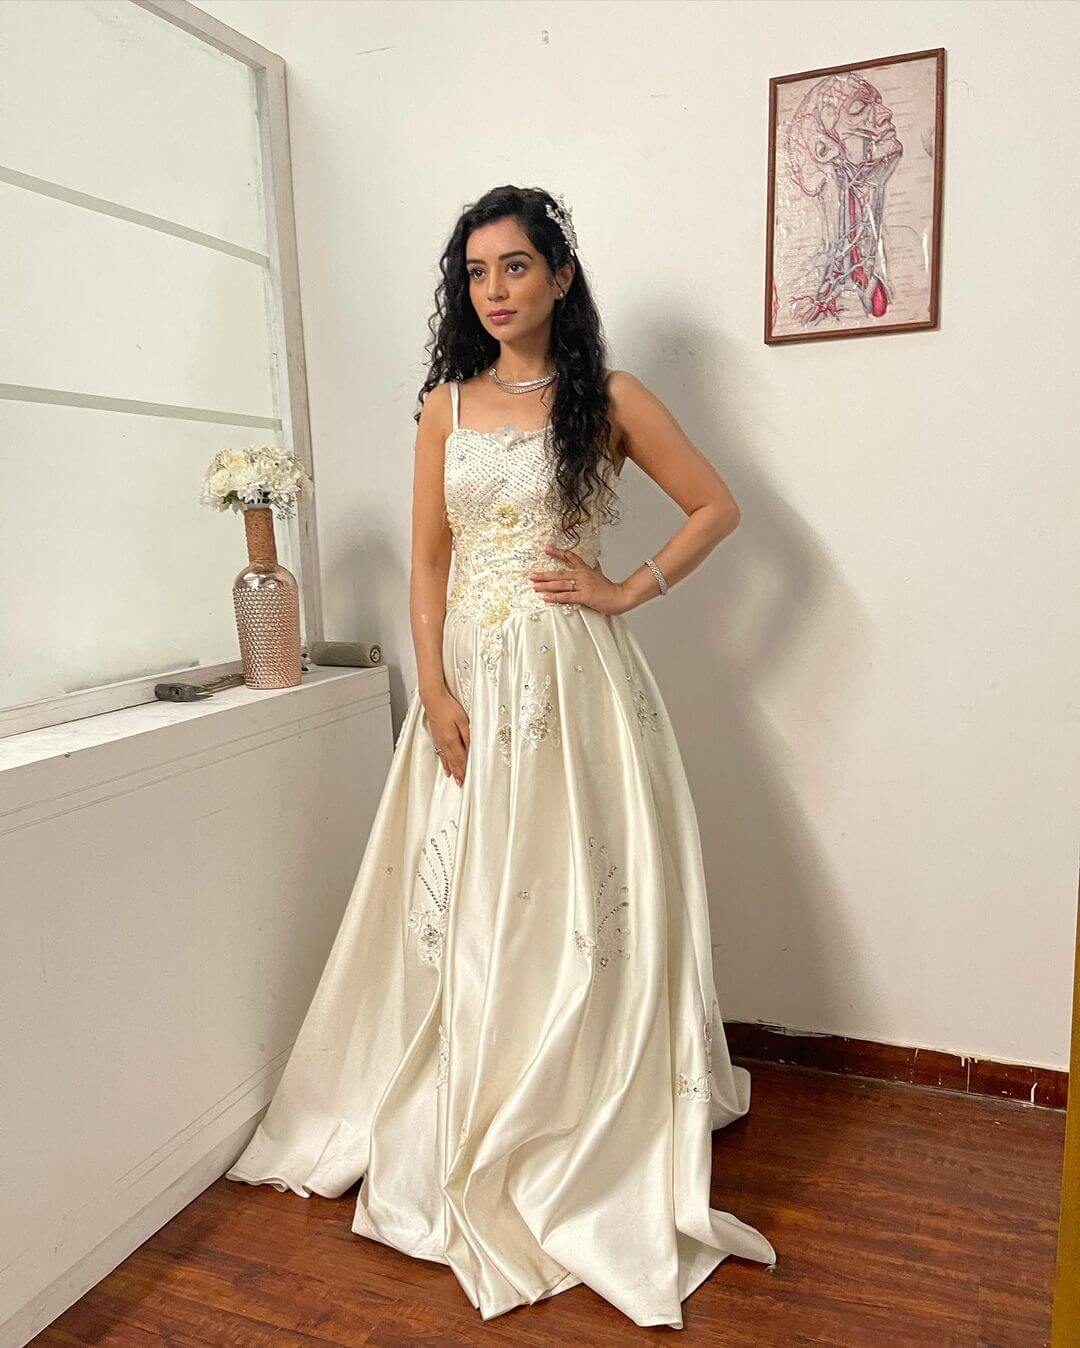 Sukirti Kandpal Dolled Up In White Glossy Princess Gown